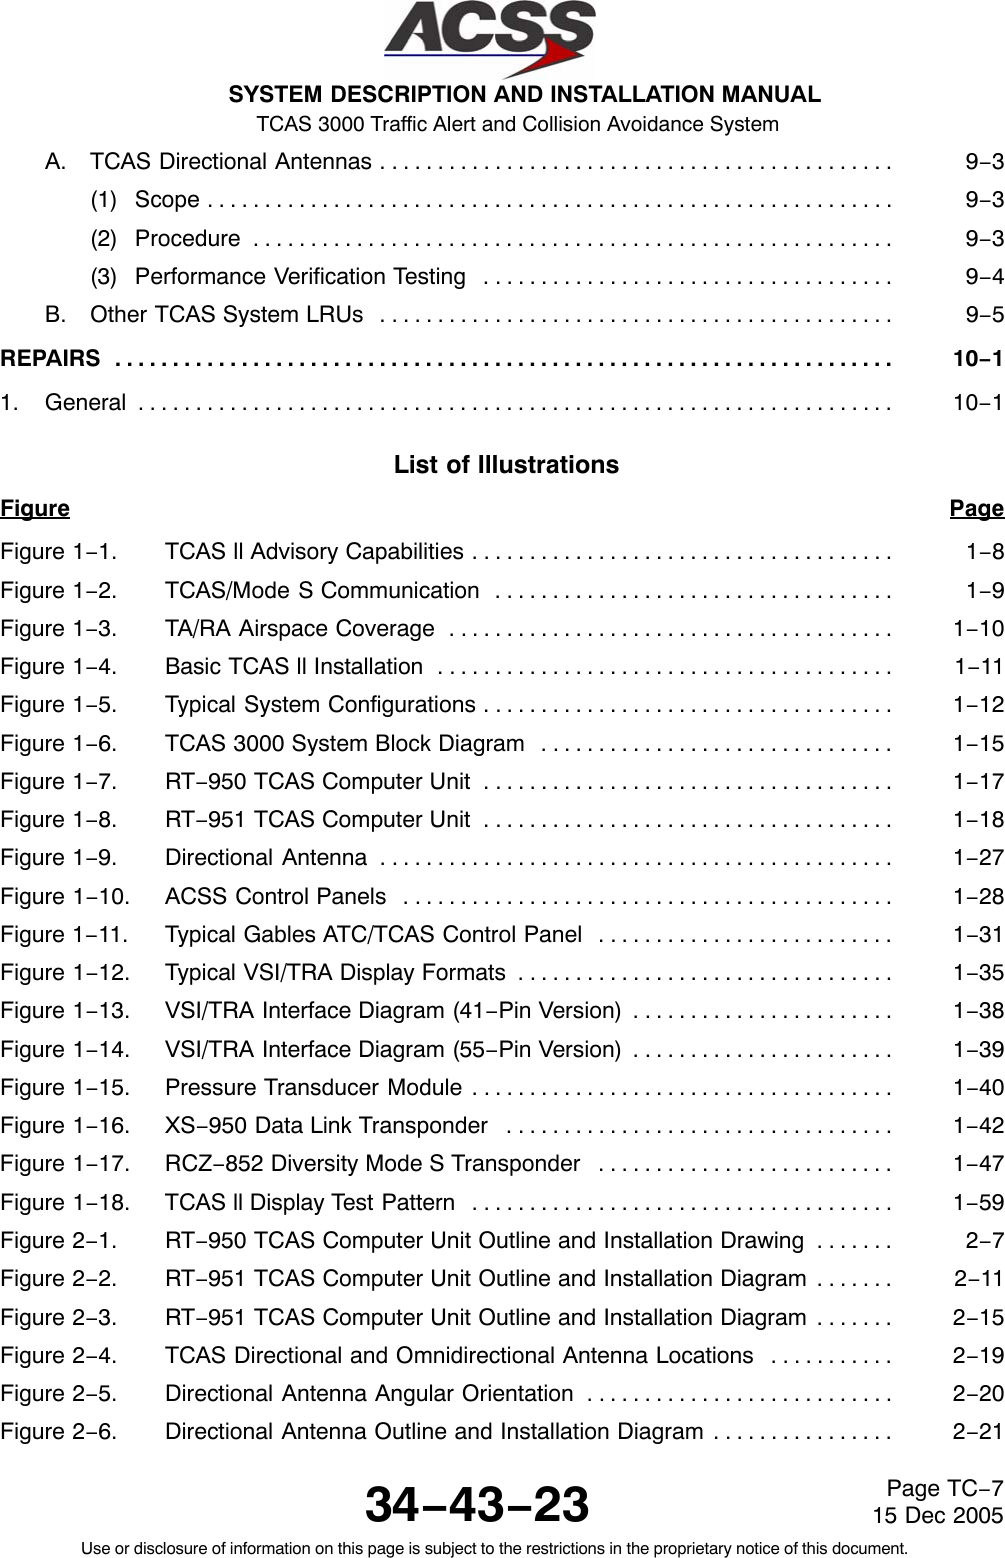 SYSTEM DESCRIPTION AND INSTALLATION MANUAL TCAS 3000 Traffic Alert and Collision Avoidance System34−43−23Use or disclosure of information on this page is subject to the restrictions in the proprietary notice of this document.Page TC−715 Dec 2005A. TCAS Directional Antennas 9−3. . . . . . . . . . . . . . . . . . . . . . . . . . . . . . . . . . . . . . . . . . . . . (1) Scope 9−3. . . . . . . . . . . . . . . . . . . . . . . . . . . . . . . . . . . . . . . . . . . . . . . . . . . . . . . . . . . . (2) Procedure 9−3. . . . . . . . . . . . . . . . . . . . . . . . . . . . . . . . . . . . . . . . . . . . . . . . . . . . . . . . (3) Performance Verification Testing 9−4. . . . . . . . . . . . . . . . . . . . . . . . . . . . . . . . . . . . B. Other TCAS System LRUs 9−5. . . . . . . . . . . . . . . . . . . . . . . . . . . . . . . . . . . . . . . . . . . . . REPAIRS 10−1. . . . . . . . . . . . . . . . . . . . . . . . . . . . . . . . . . . . . . . . . . . . . . . . . . . . . . . . . . . . . . . . . . . . 1. General 10−1. . . . . . . . . . . . . . . . . . . . . . . . . . . . . . . . . . . . . . . . . . . . . . . . . . . . . . . . . . . . . . . . . . List of IllustrationsFigure PageFigure 1−1. TCAS ll Advisory Capabilities 1−8. . . . . . . . . . . . . . . . . . . . . . . . . . . . . . . . . . . . . Figure 1−2. TCAS/Mode S Communication 1−9. . . . . . . . . . . . . . . . . . . . . . . . . . . . . . . . . . . Figure 1−3. TA/RA Airspace Coverage 1−10. . . . . . . . . . . . . . . . . . . . . . . . . . . . . . . . . . . . . . . Figure 1−4. Basic TCAS ll Installation 1−11. . . . . . . . . . . . . . . . . . . . . . . . . . . . . . . . . . . . . . . . Figure 1−5. Typical System Configurations 1−12. . . . . . . . . . . . . . . . . . . . . . . . . . . . . . . . . . . . Figure 1−6. TCAS 3000 System Block Diagram 1−15. . . . . . . . . . . . . . . . . . . . . . . . . . . . . . . Figure 1−7. RT−950 TCAS Computer Unit 1−17. . . . . . . . . . . . . . . . . . . . . . . . . . . . . . . . . . . . Figure 1−8. RT−951 TCAS Computer Unit 1−18. . . . . . . . . . . . . . . . . . . . . . . . . . . . . . . . . . . . Figure 1−9. Directional Antenna 1−27. . . . . . . . . . . . . . . . . . . . . . . . . . . . . . . . . . . . . . . . . . . . . Figure 1−10. ACSS Control Panels 1−28. . . . . . . . . . . . . . . . . . . . . . . . . . . . . . . . . . . . . . . . . . . Figure 1−11. Typical Gables ATC/TCAS Control Panel 1−31. . . . . . . . . . . . . . . . . . . . . . . . . . Figure 1−12. Typical VSI/TRA Display Formats 1−35. . . . . . . . . . . . . . . . . . . . . . . . . . . . . . . . . Figure 1−13. VSI/TRA Interface Diagram (41−Pin Version) 1−38. . . . . . . . . . . . . . . . . . . . . . . Figure 1−14. VSI/TRA Interface Diagram (55−Pin Version) 1−39. . . . . . . . . . . . . . . . . . . . . . . Figure 1−15. Pressure Transducer Module 1−40. . . . . . . . . . . . . . . . . . . . . . . . . . . . . . . . . . . . . Figure 1−16. XS−950 Data Link Transponder 1−42. . . . . . . . . . . . . . . . . . . . . . . . . . . . . . . . . . Figure 1−17. RCZ−852 Diversity Mode S Transponder 1−47. . . . . . . . . . . . . . . . . . . . . . . . . . Figure 1−18. TCAS ll Display Test Pattern 1−59. . . . . . . . . . . . . . . . . . . . . . . . . . . . . . . . . . . . . Figure 2−1. RT−950 TCAS Computer Unit Outline and Installation Drawing 2−7. . . . . . . Figure 2−2. RT−951 TCAS Computer Unit Outline and Installation Diagram 2−11. . . . . . . Figure 2−3. RT−951 TCAS Computer Unit Outline and Installation Diagram 2−15. . . . . . . Figure 2−4. TCAS Directional and Omnidirectional Antenna Locations 2−19. . . . . . . . . . . Figure 2−5. Directional Antenna Angular Orientation 2−20. . . . . . . . . . . . . . . . . . . . . . . . . . . Figure 2−6. Directional Antenna Outline and Installation Diagram 2−21. . . . . . . . . . . . . . . . 